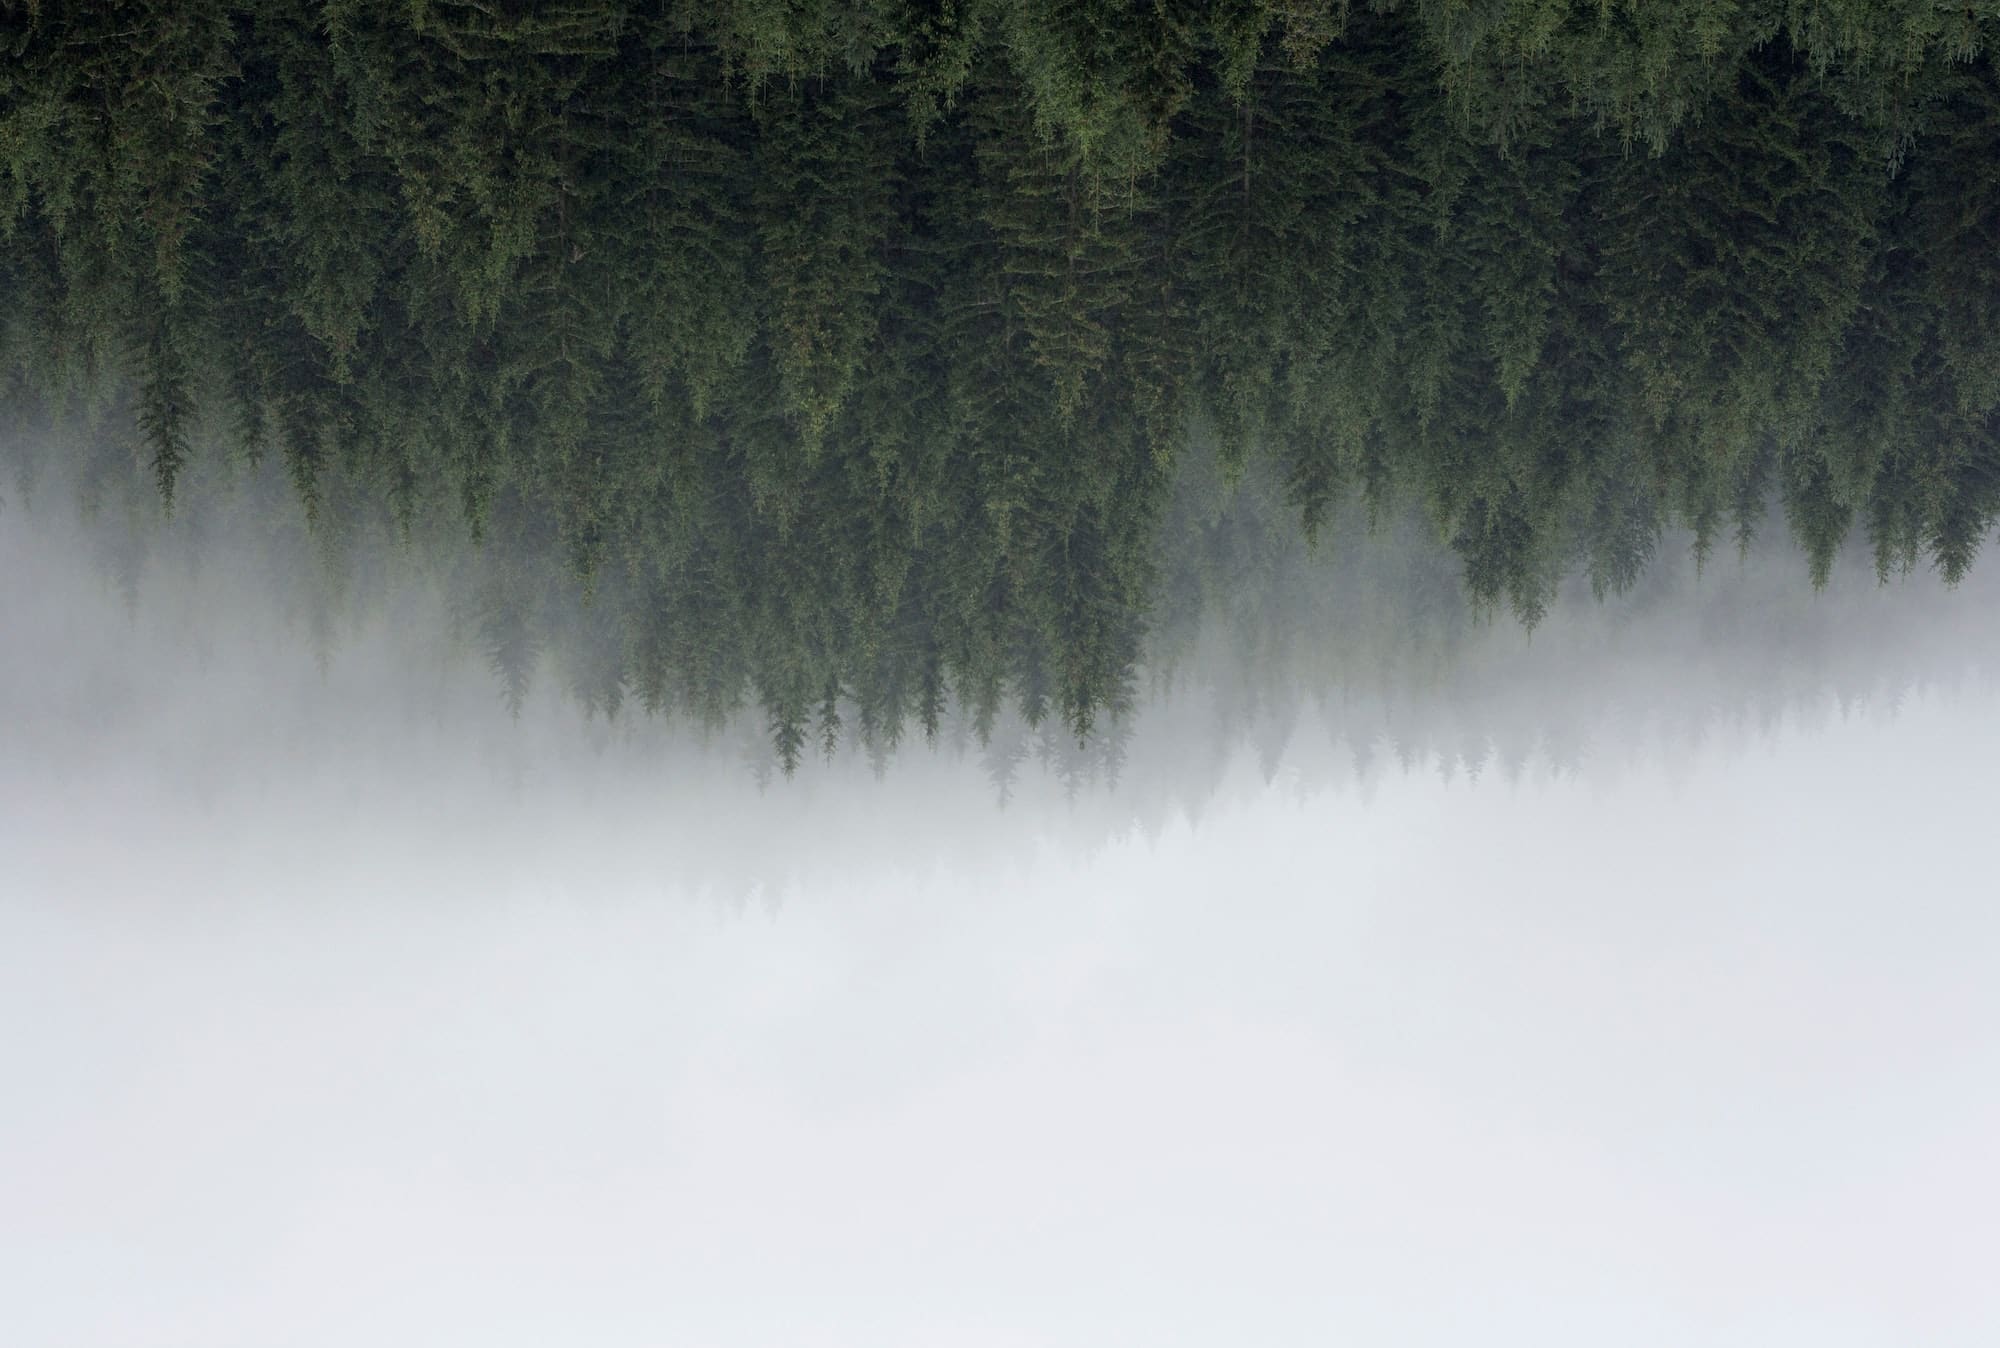 Fog and evergreen forest, upside down